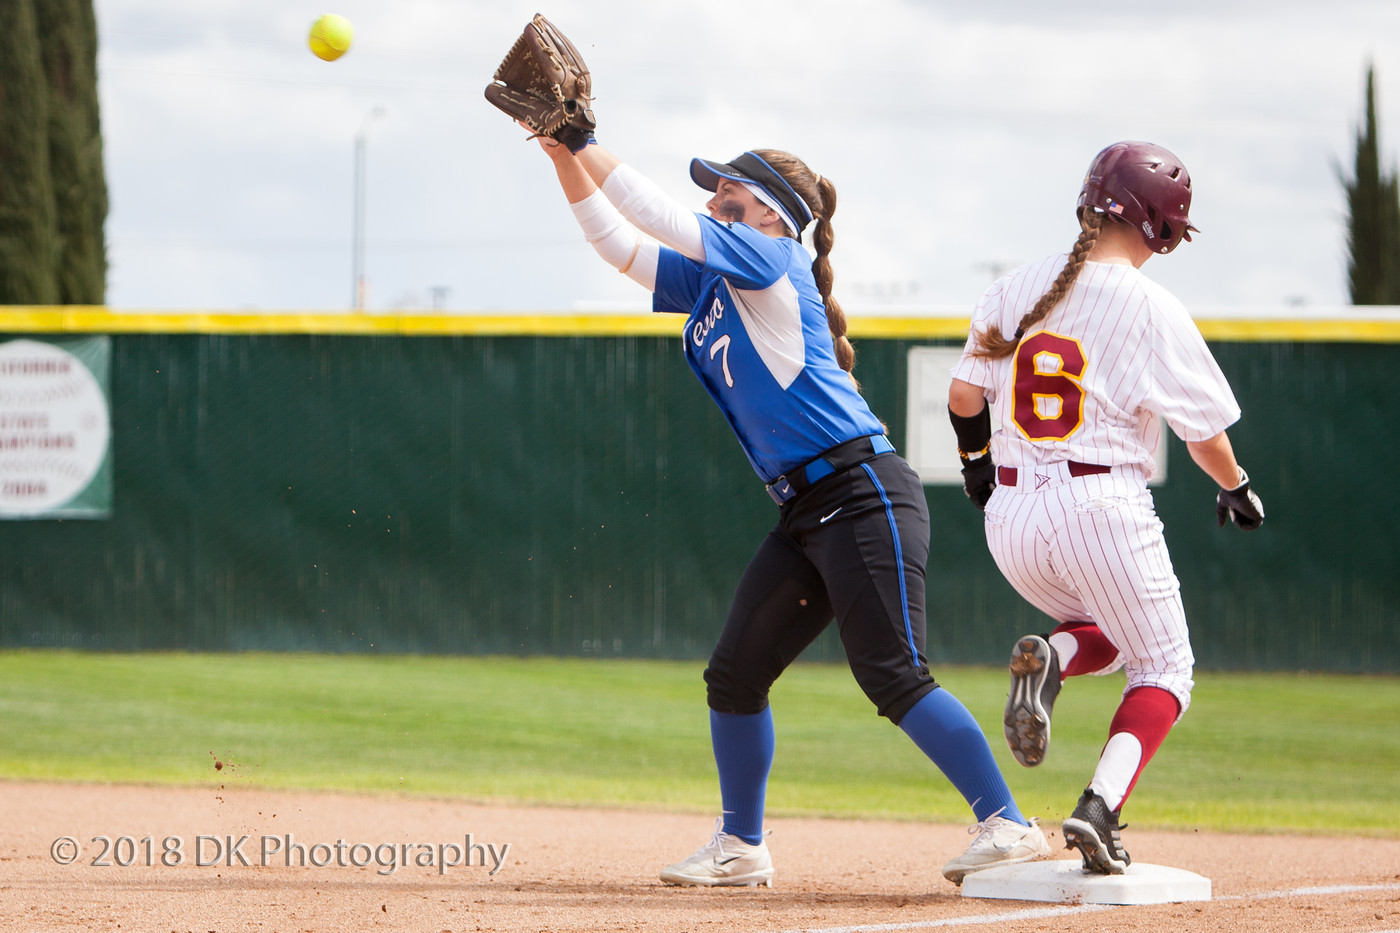 City commits 4 errors that lead to 4 Sierra runs as the Wolverines sweep the Big 8 doubleheader